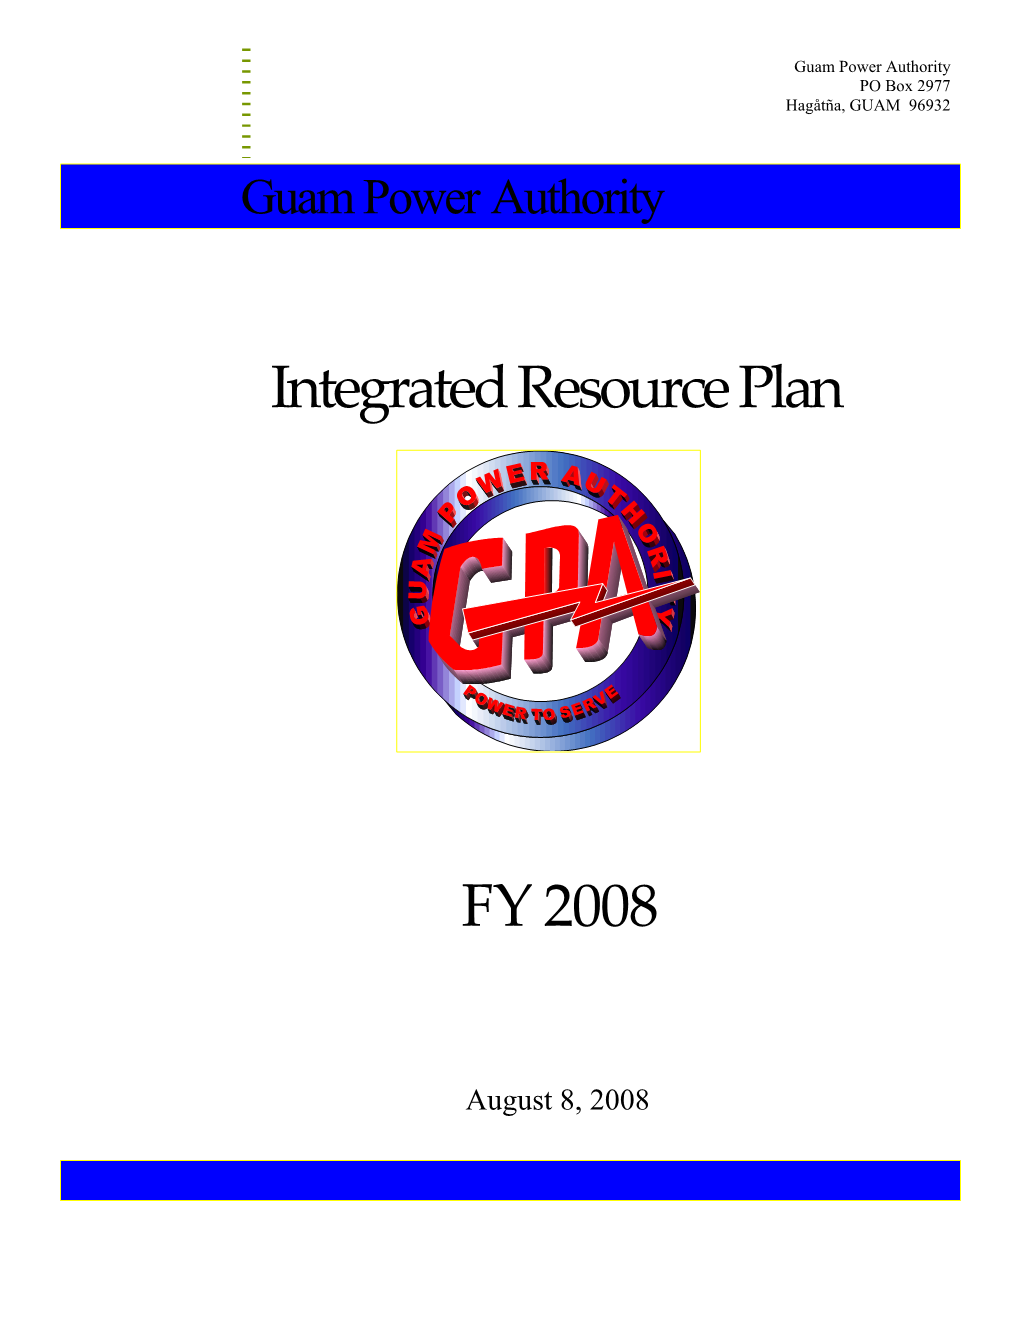 Guam Power Authority Integrated Resource Plan